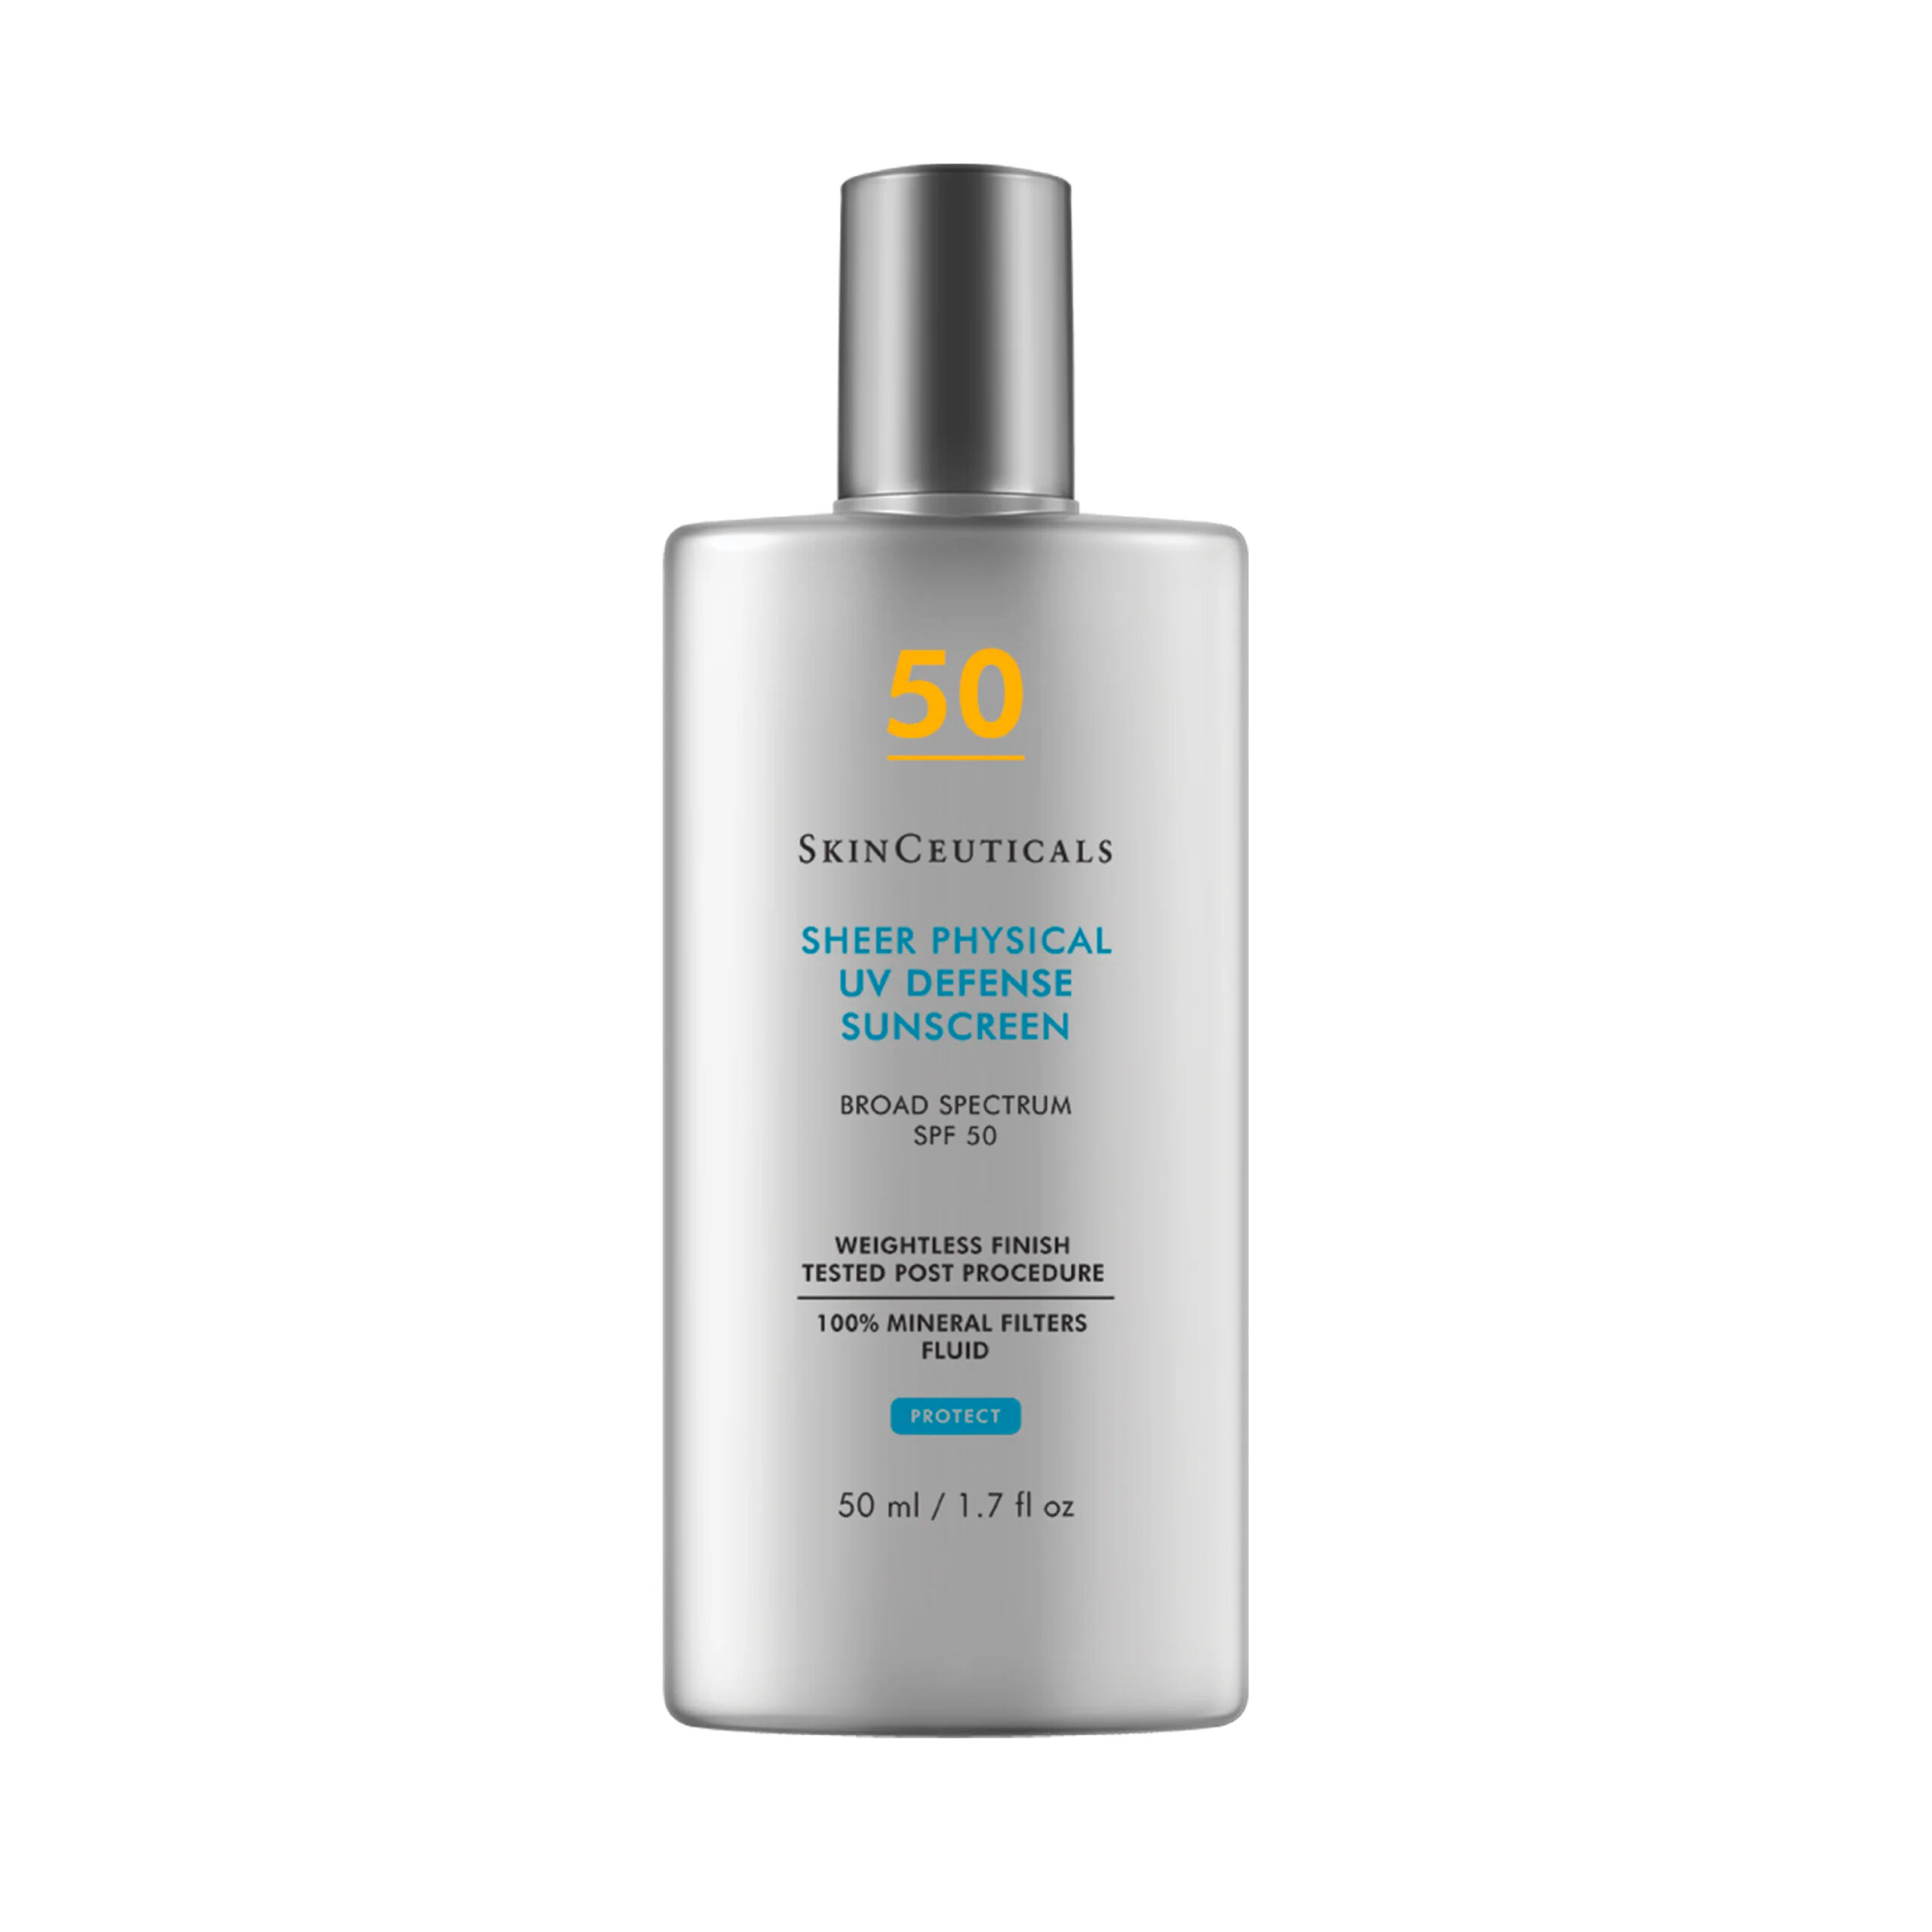 NMD SHOP SkinCeuticals Sheer Physical UV Defense SPF 50